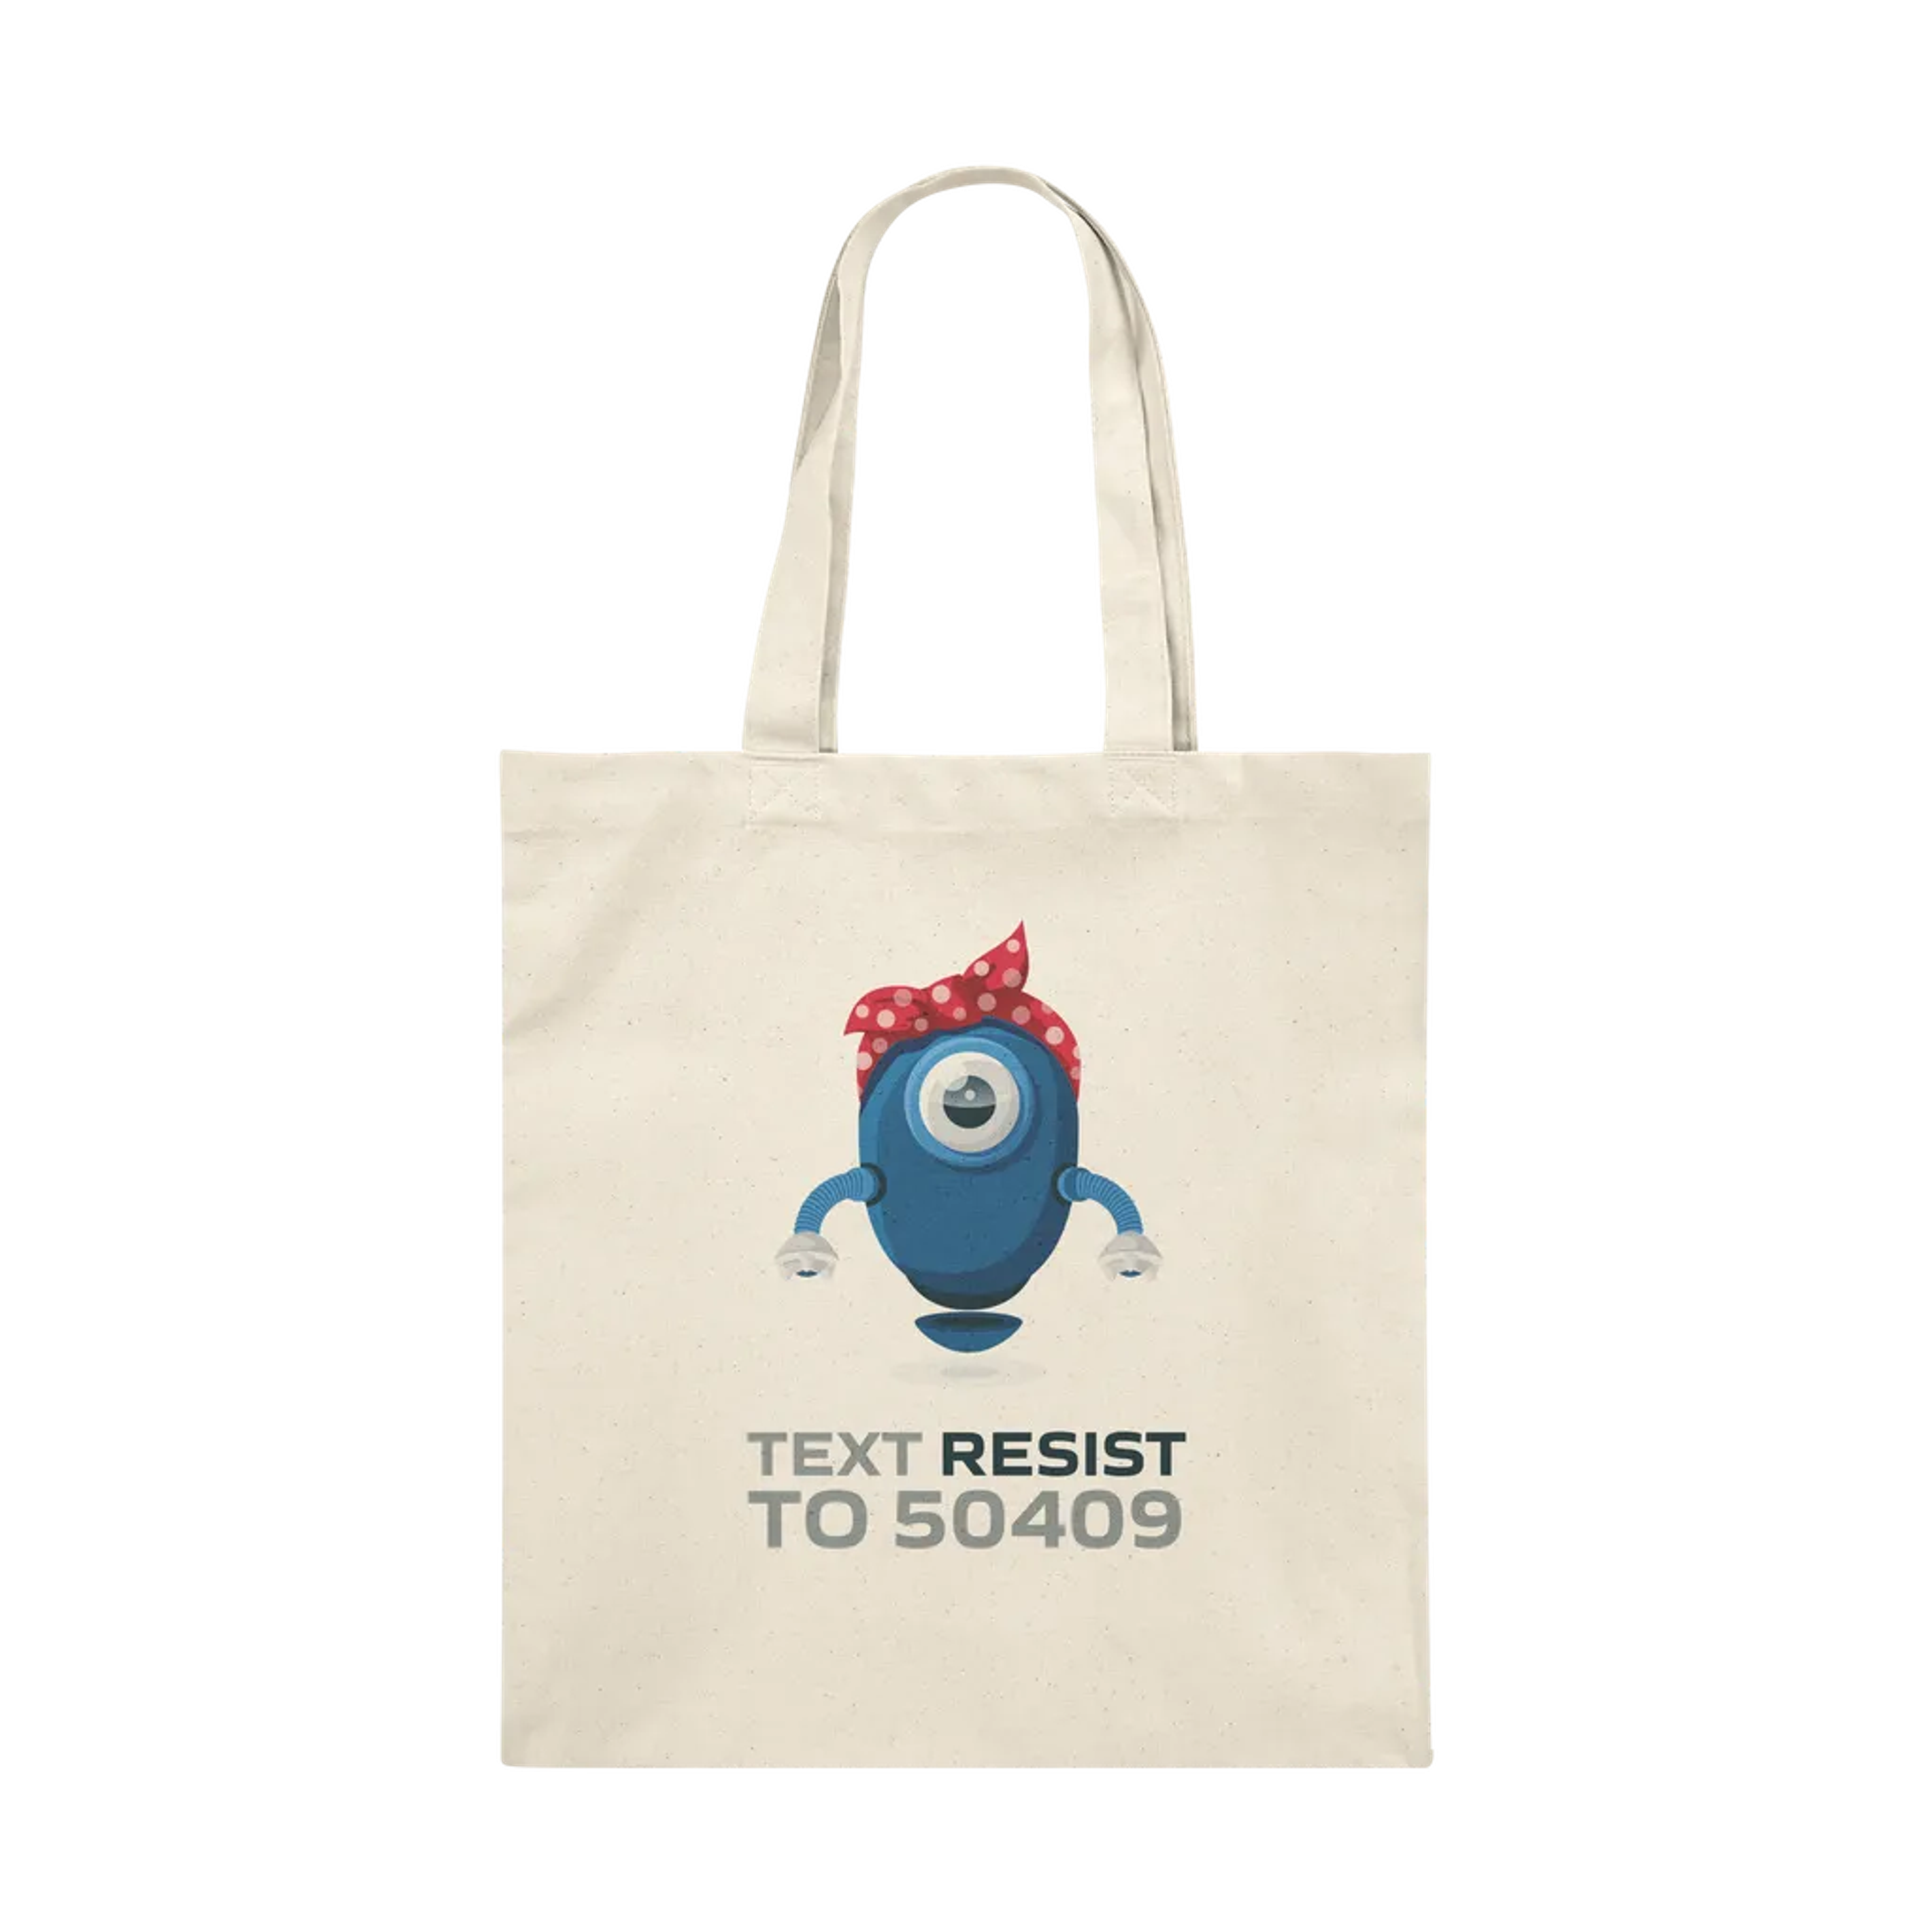 Natural colored tote bag with an image of the Resistbot robot on it